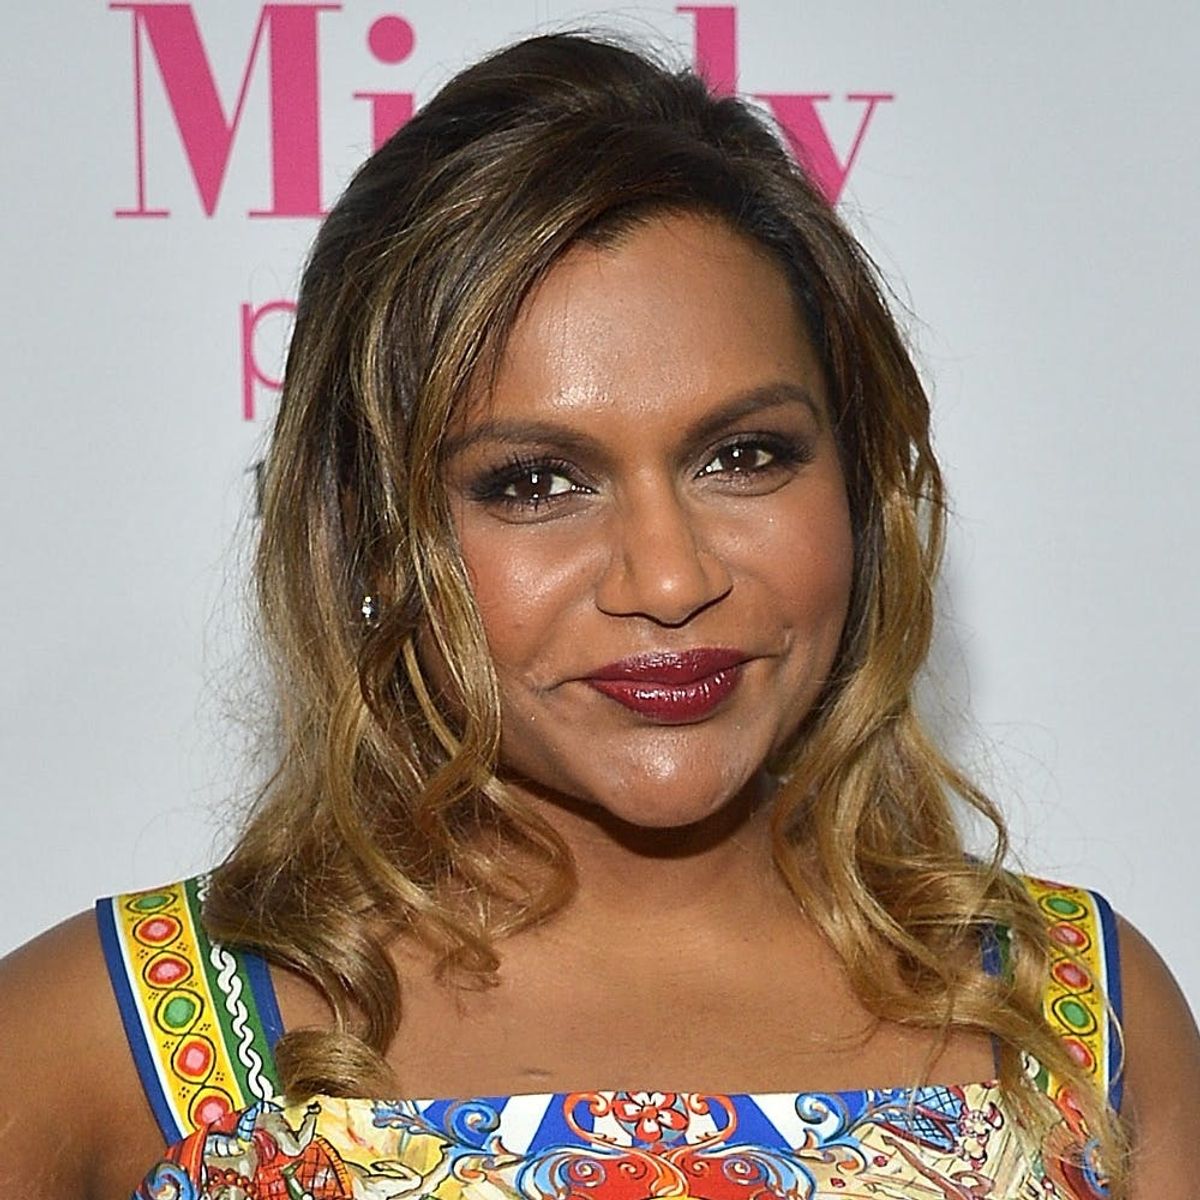 Mindy Kaling Wrote and Will Star in What’s Sure to Be the Next Devil Wears Prada